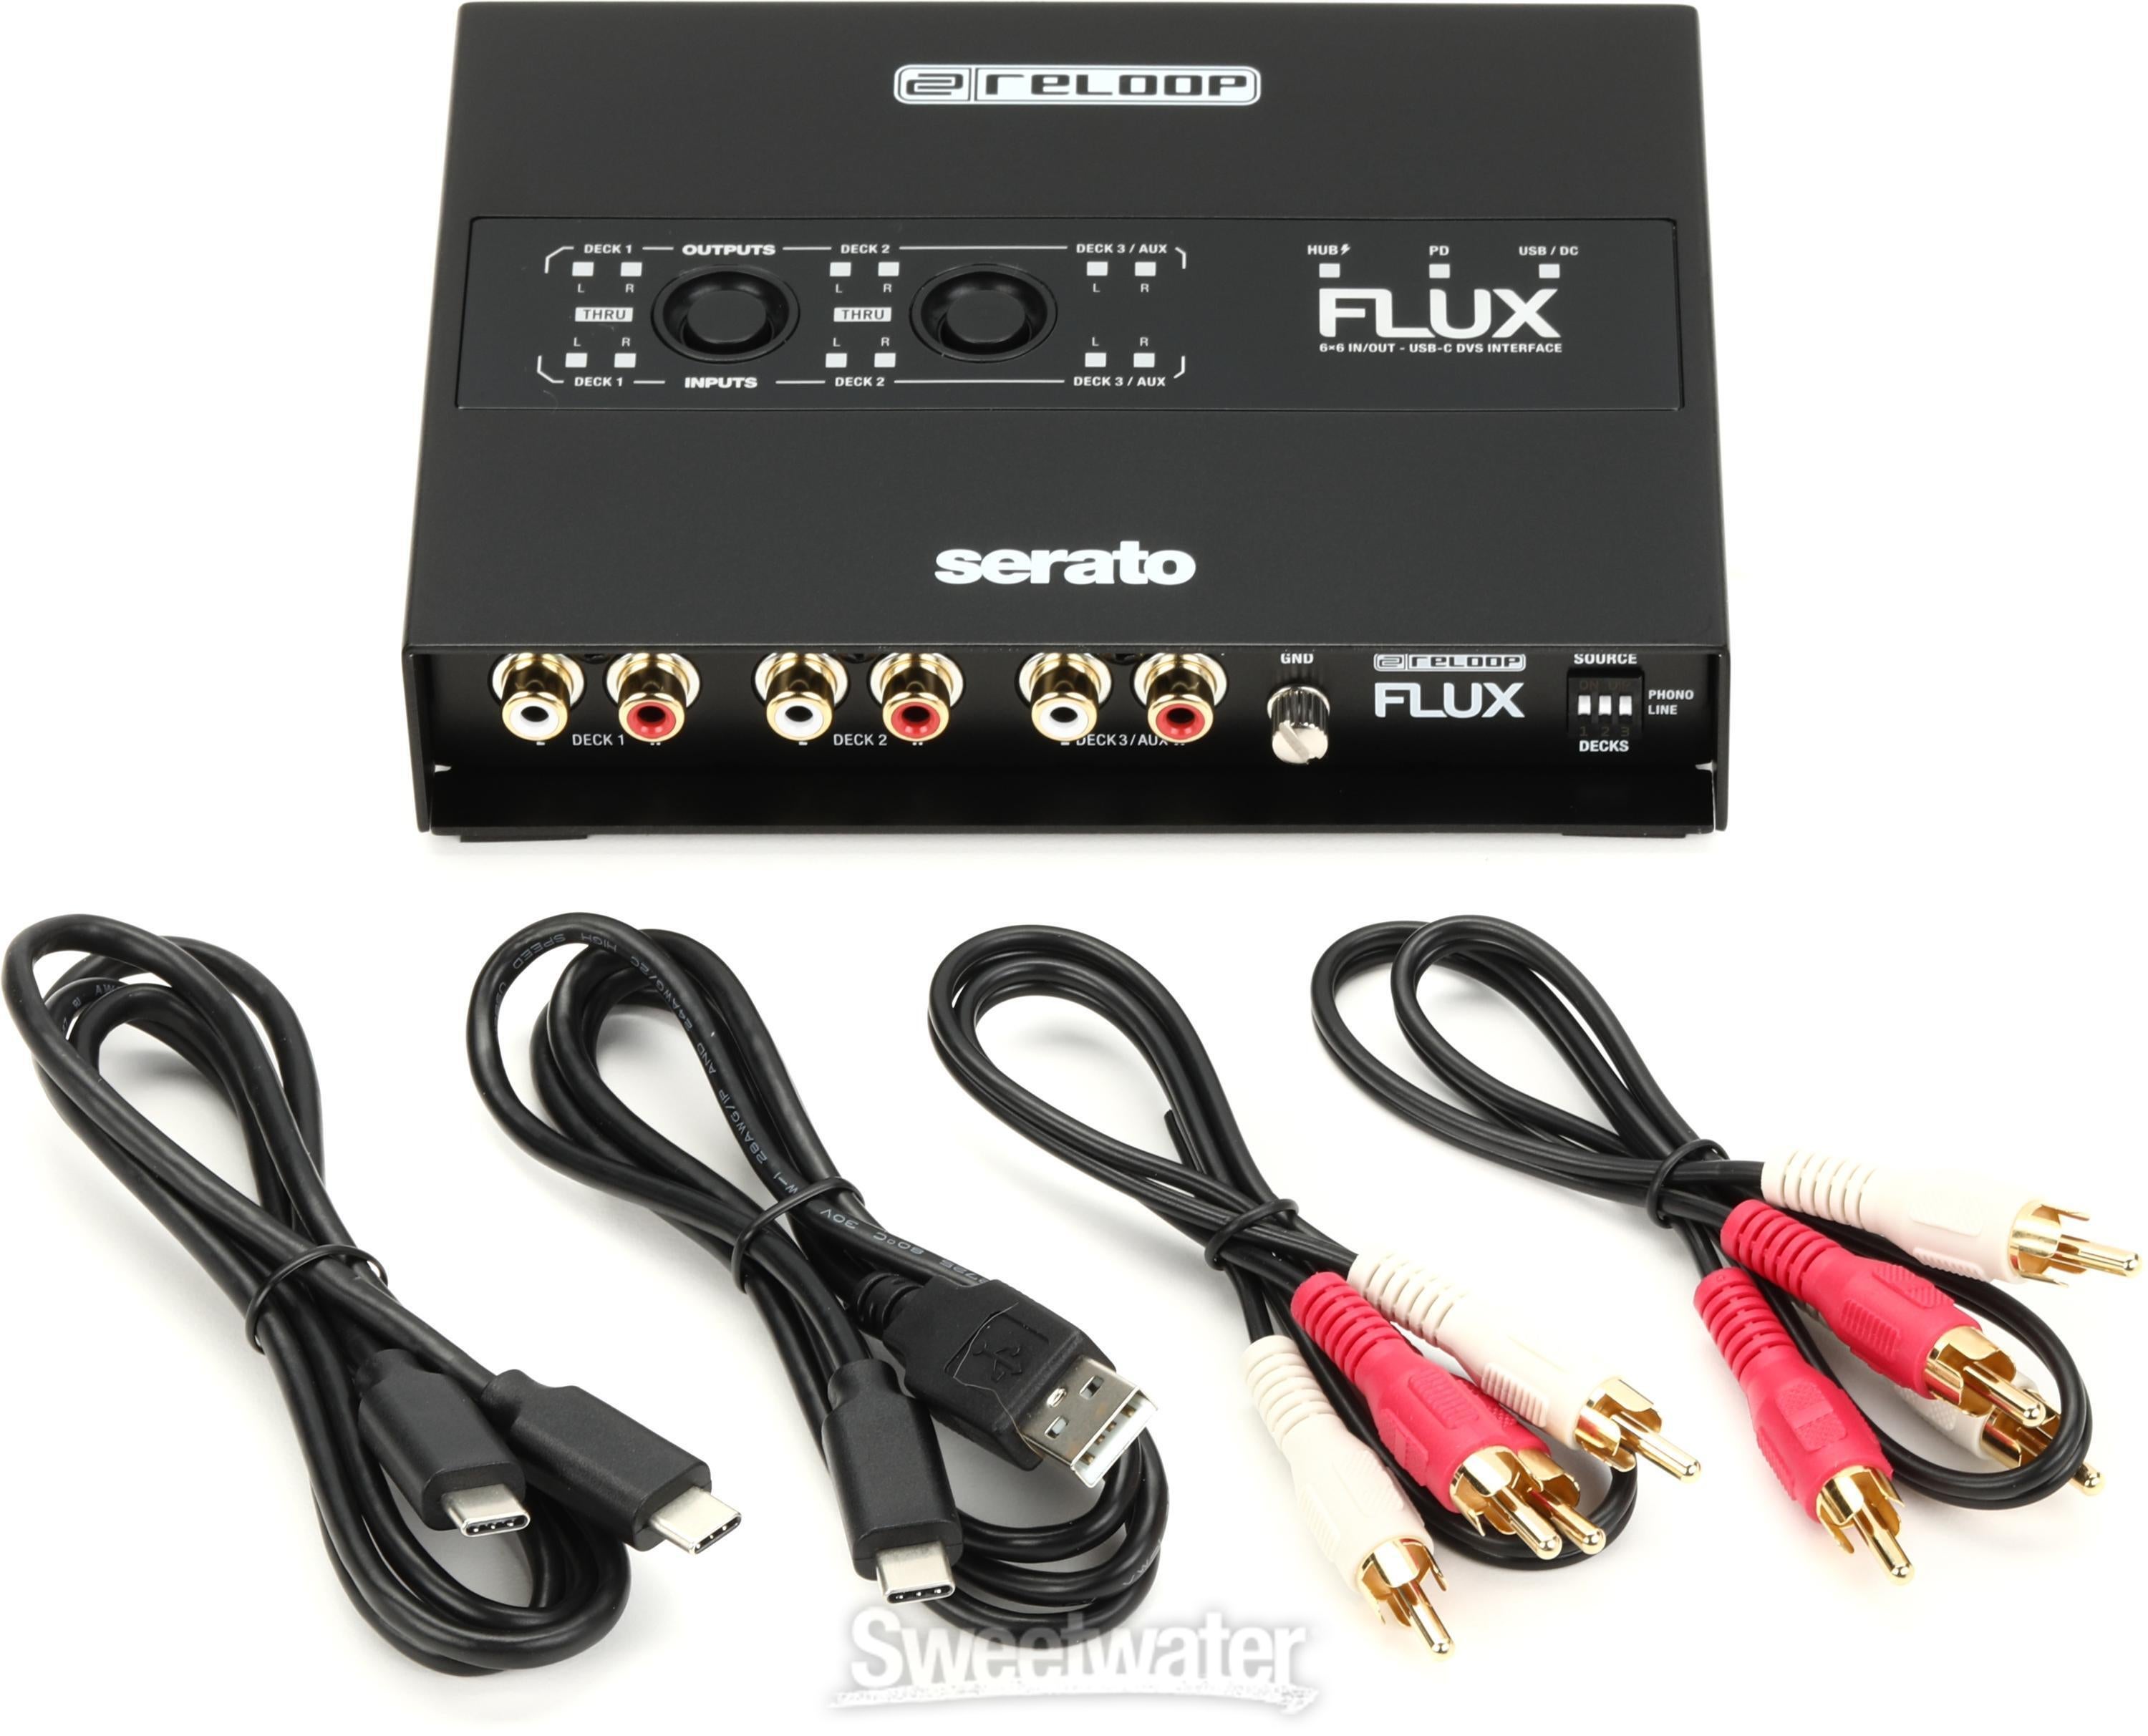 Reloop Flux 3-channel 6x6 DVS Interface for Serato DJ Pro | Sweetwater